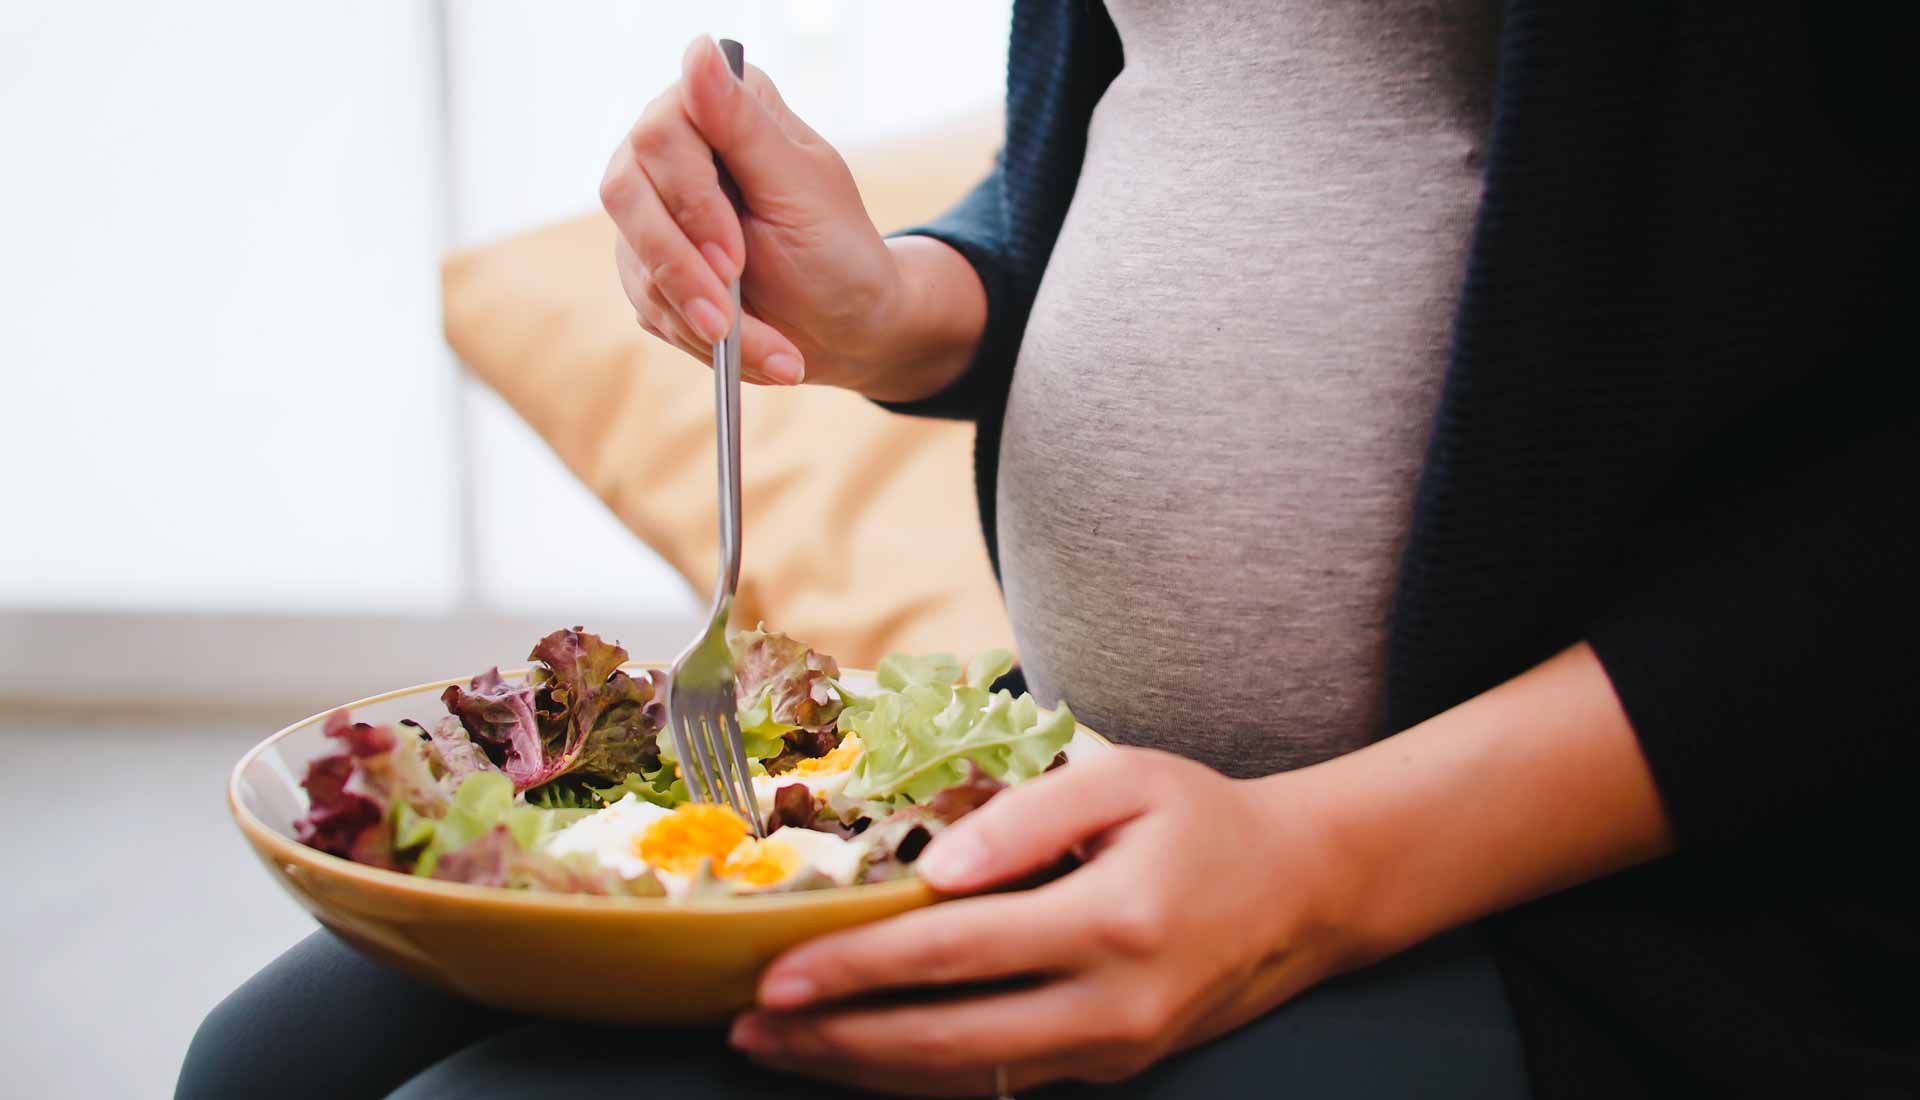 10 best foods to eat when you're pregnant